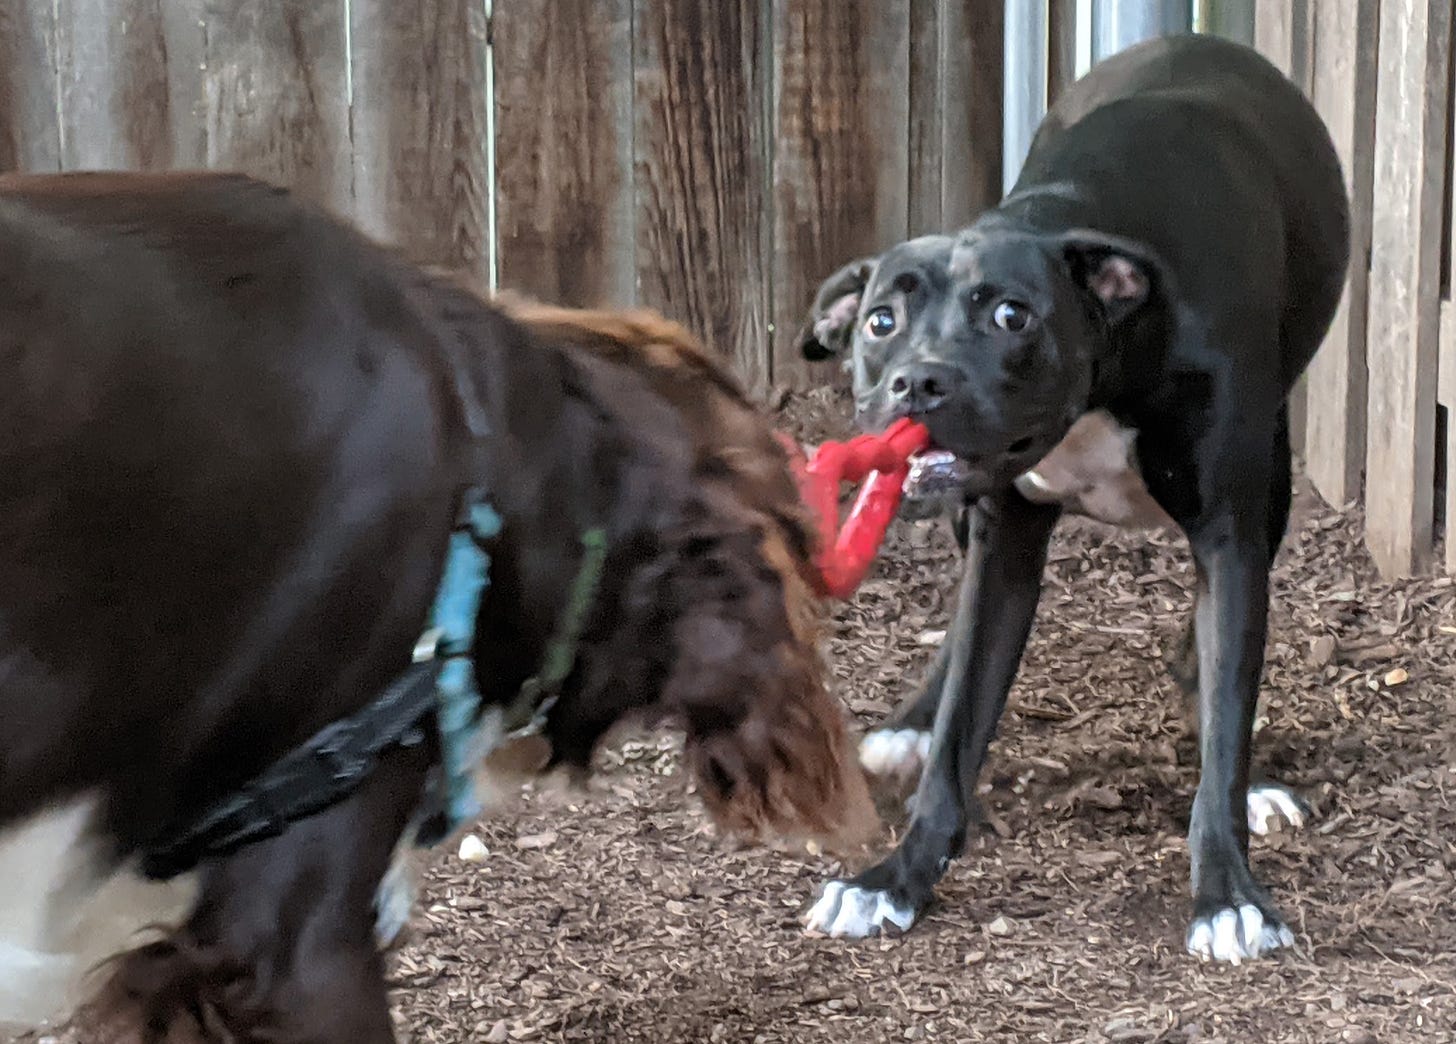 Oreo plays tug of war with another dog during a playdate.